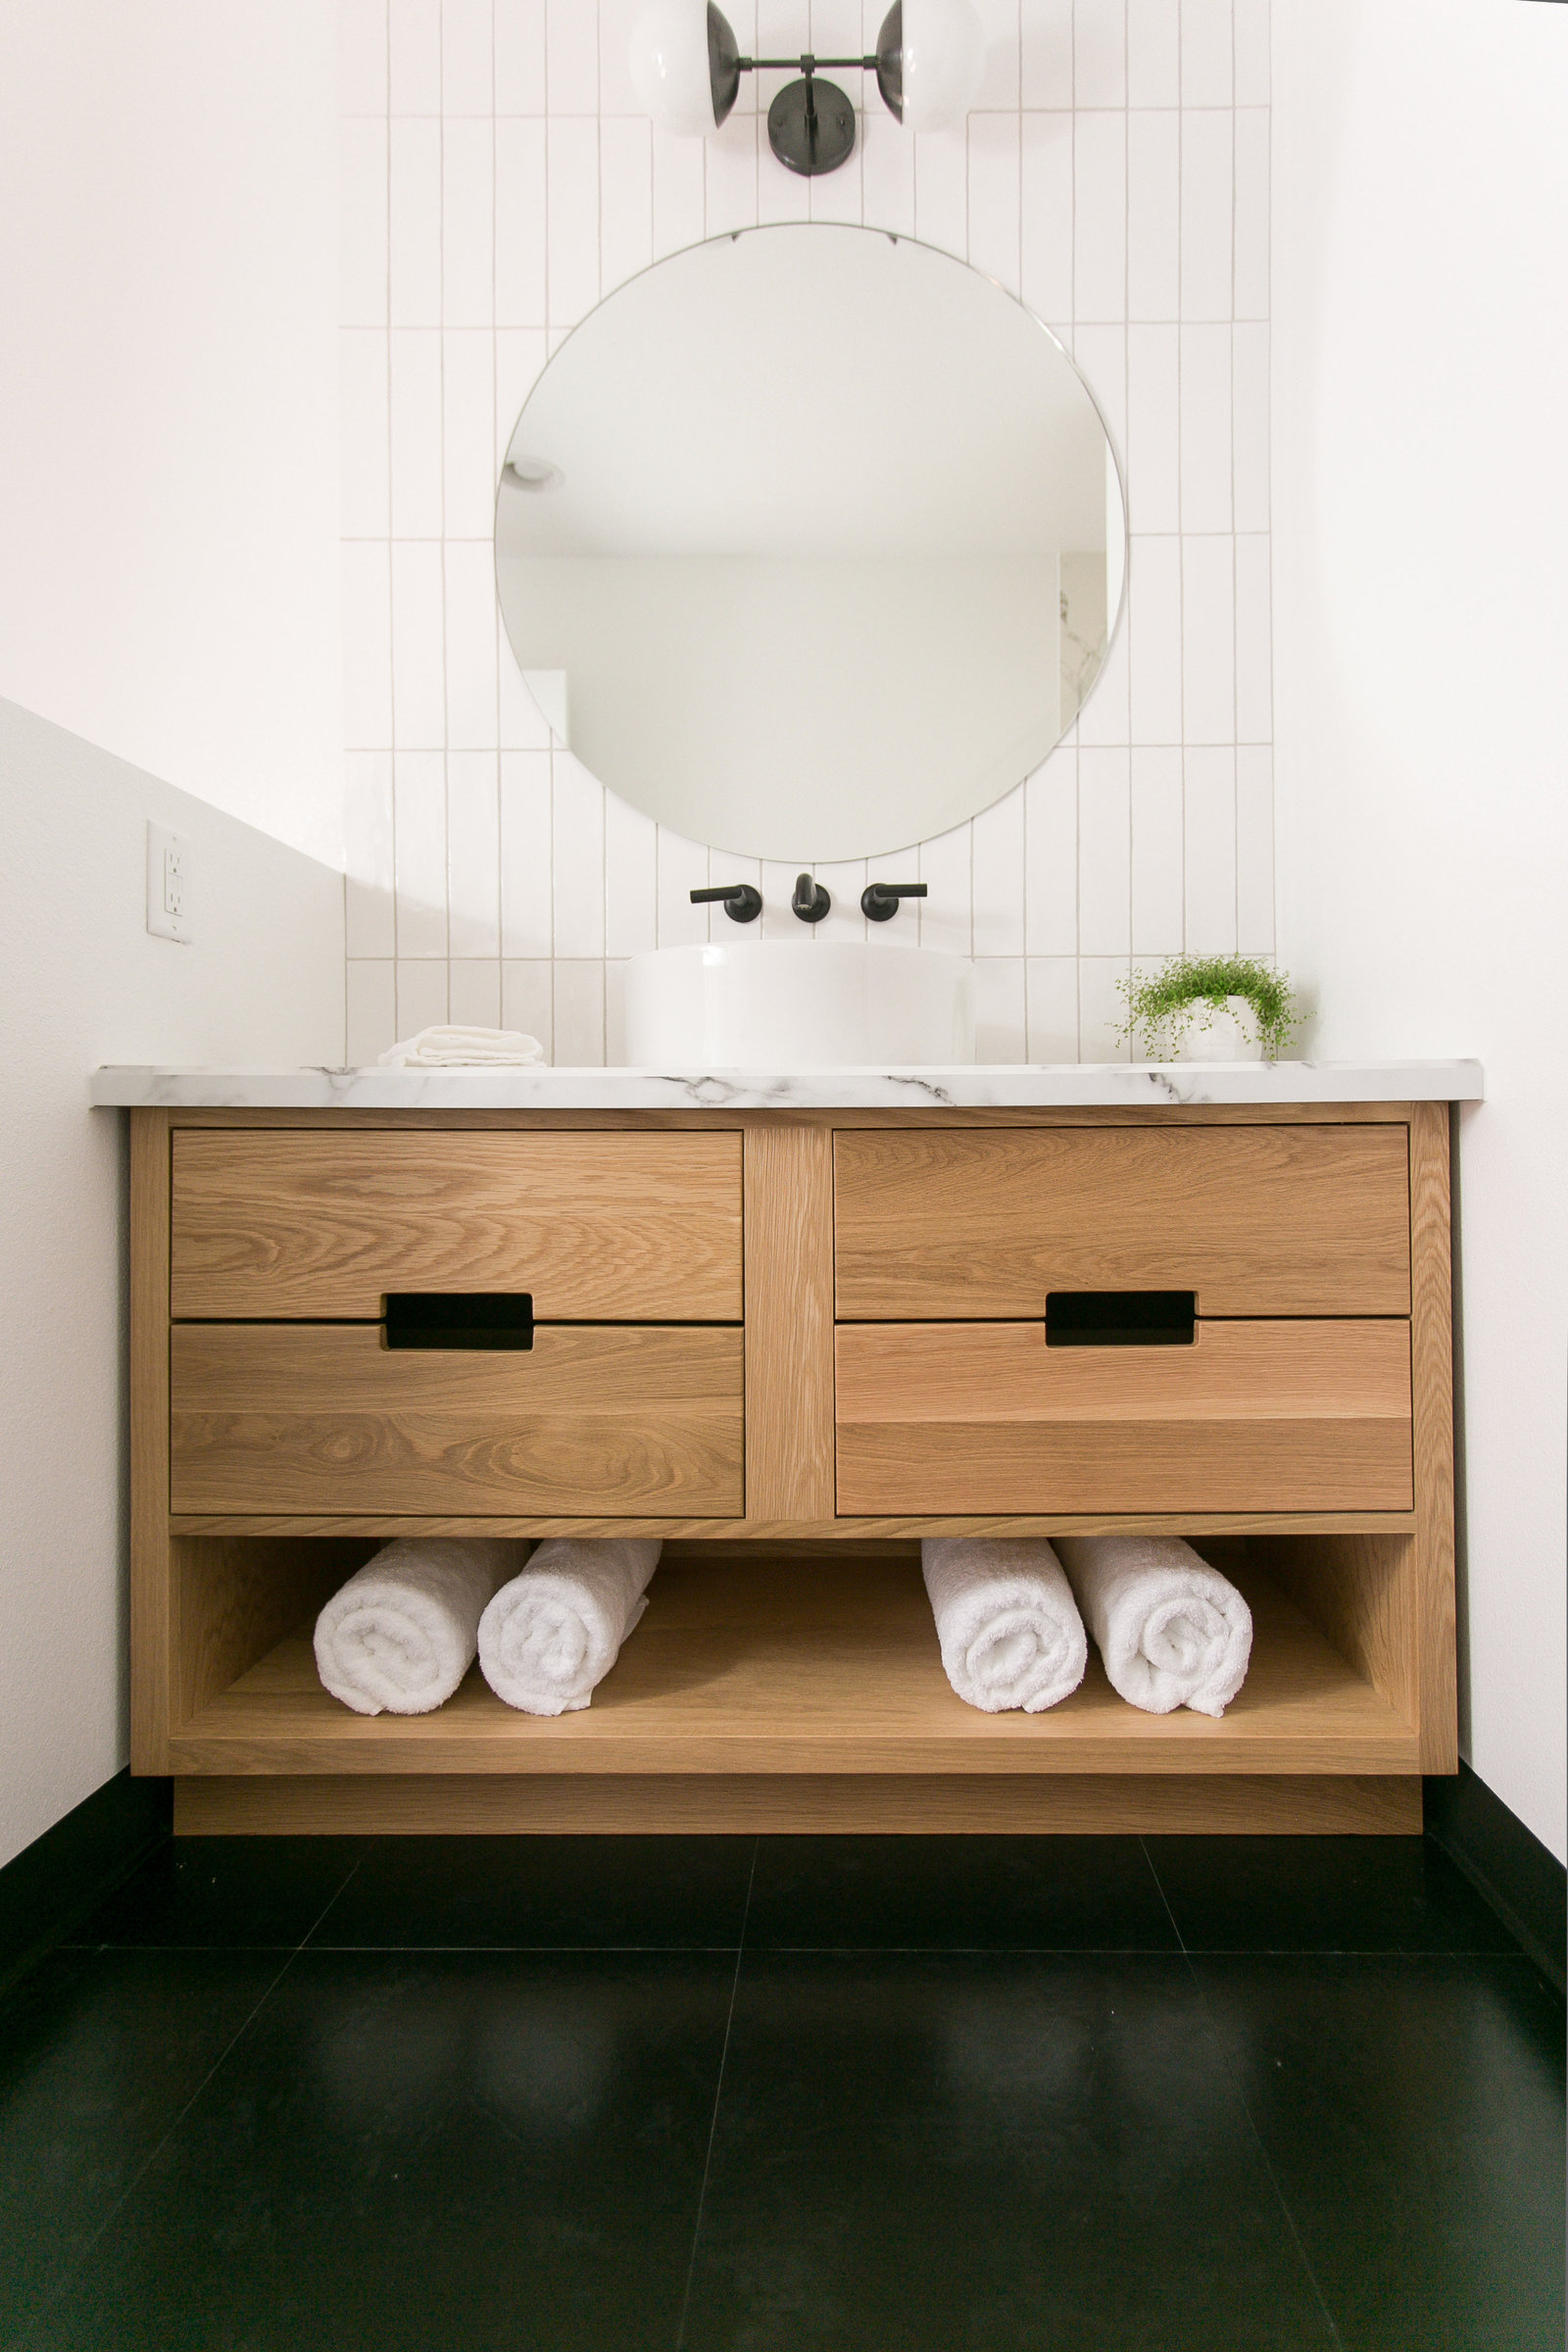 Modern BnB Bath with custom mid tone vanity. The straight stack vertical tile frames the modern vessel sink design with a wall mounted faucet marble patterned countertop.